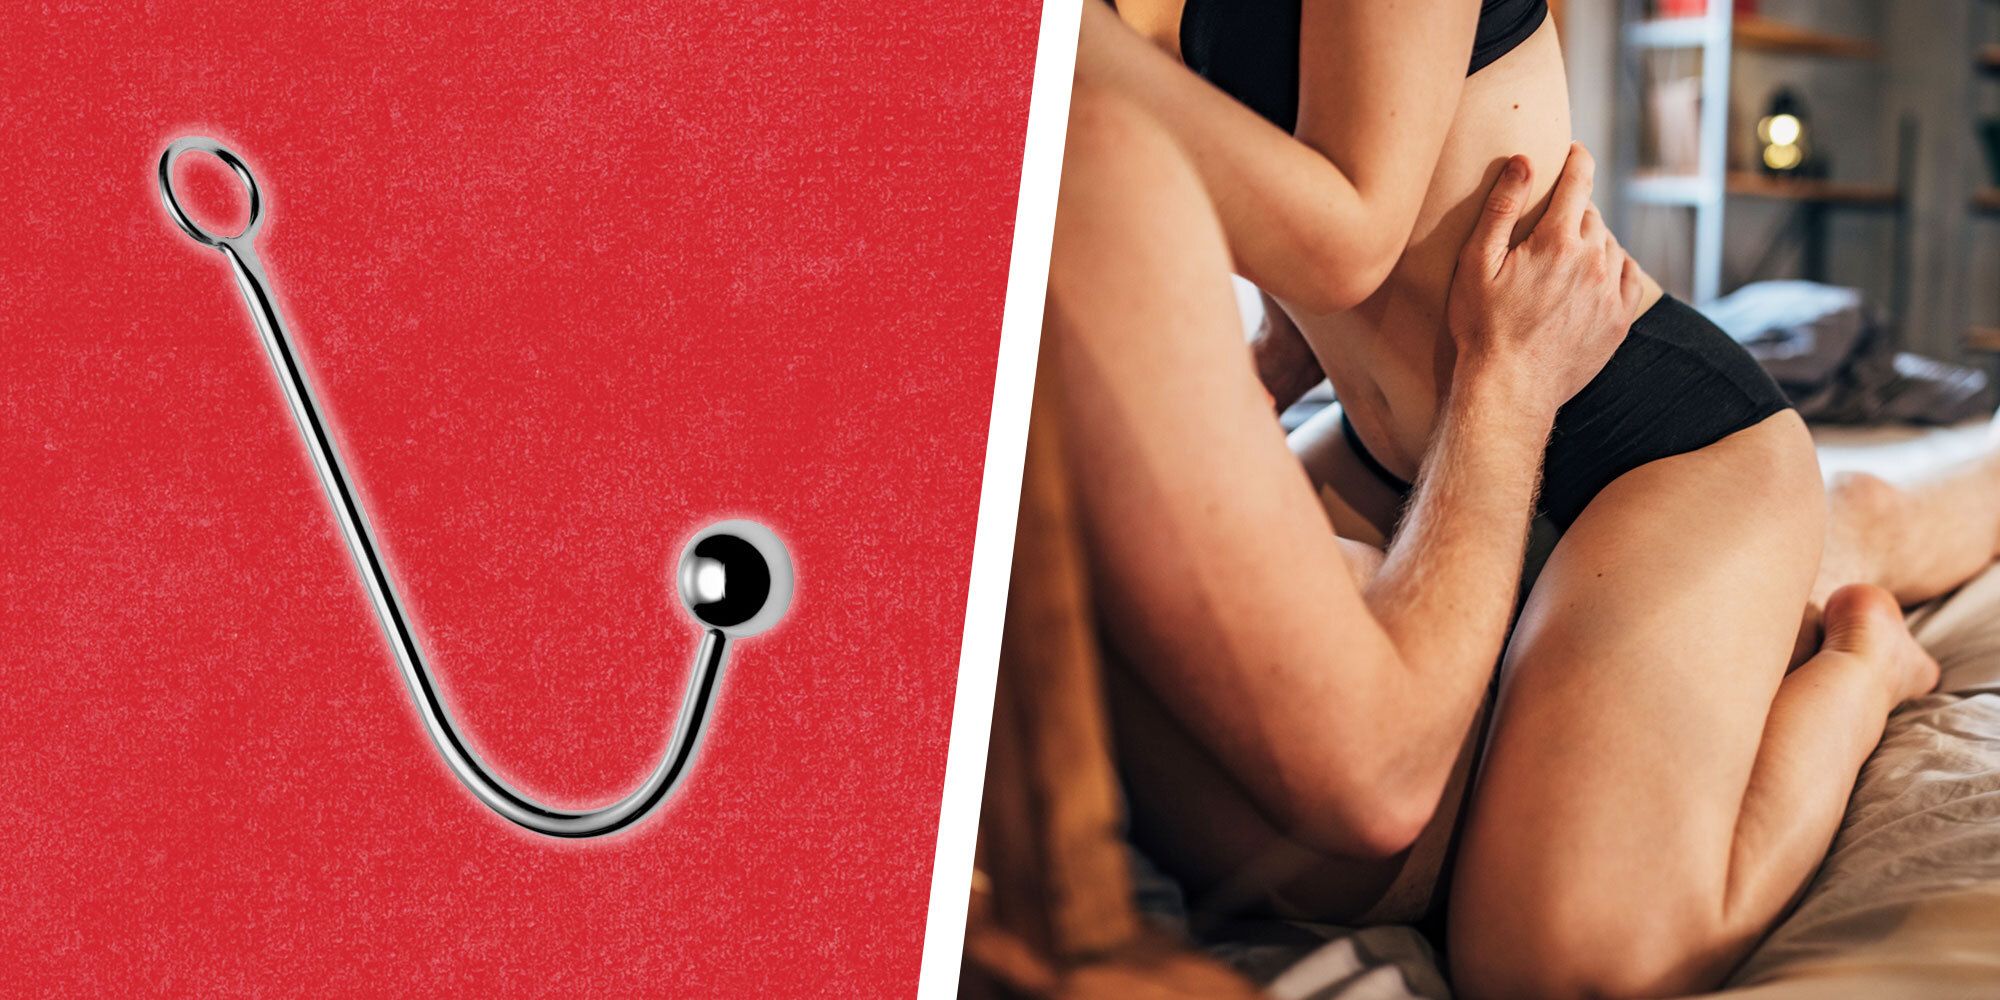 Anal Hooks What They Are and How to Use Them, According to Experts Nude Pic Hq